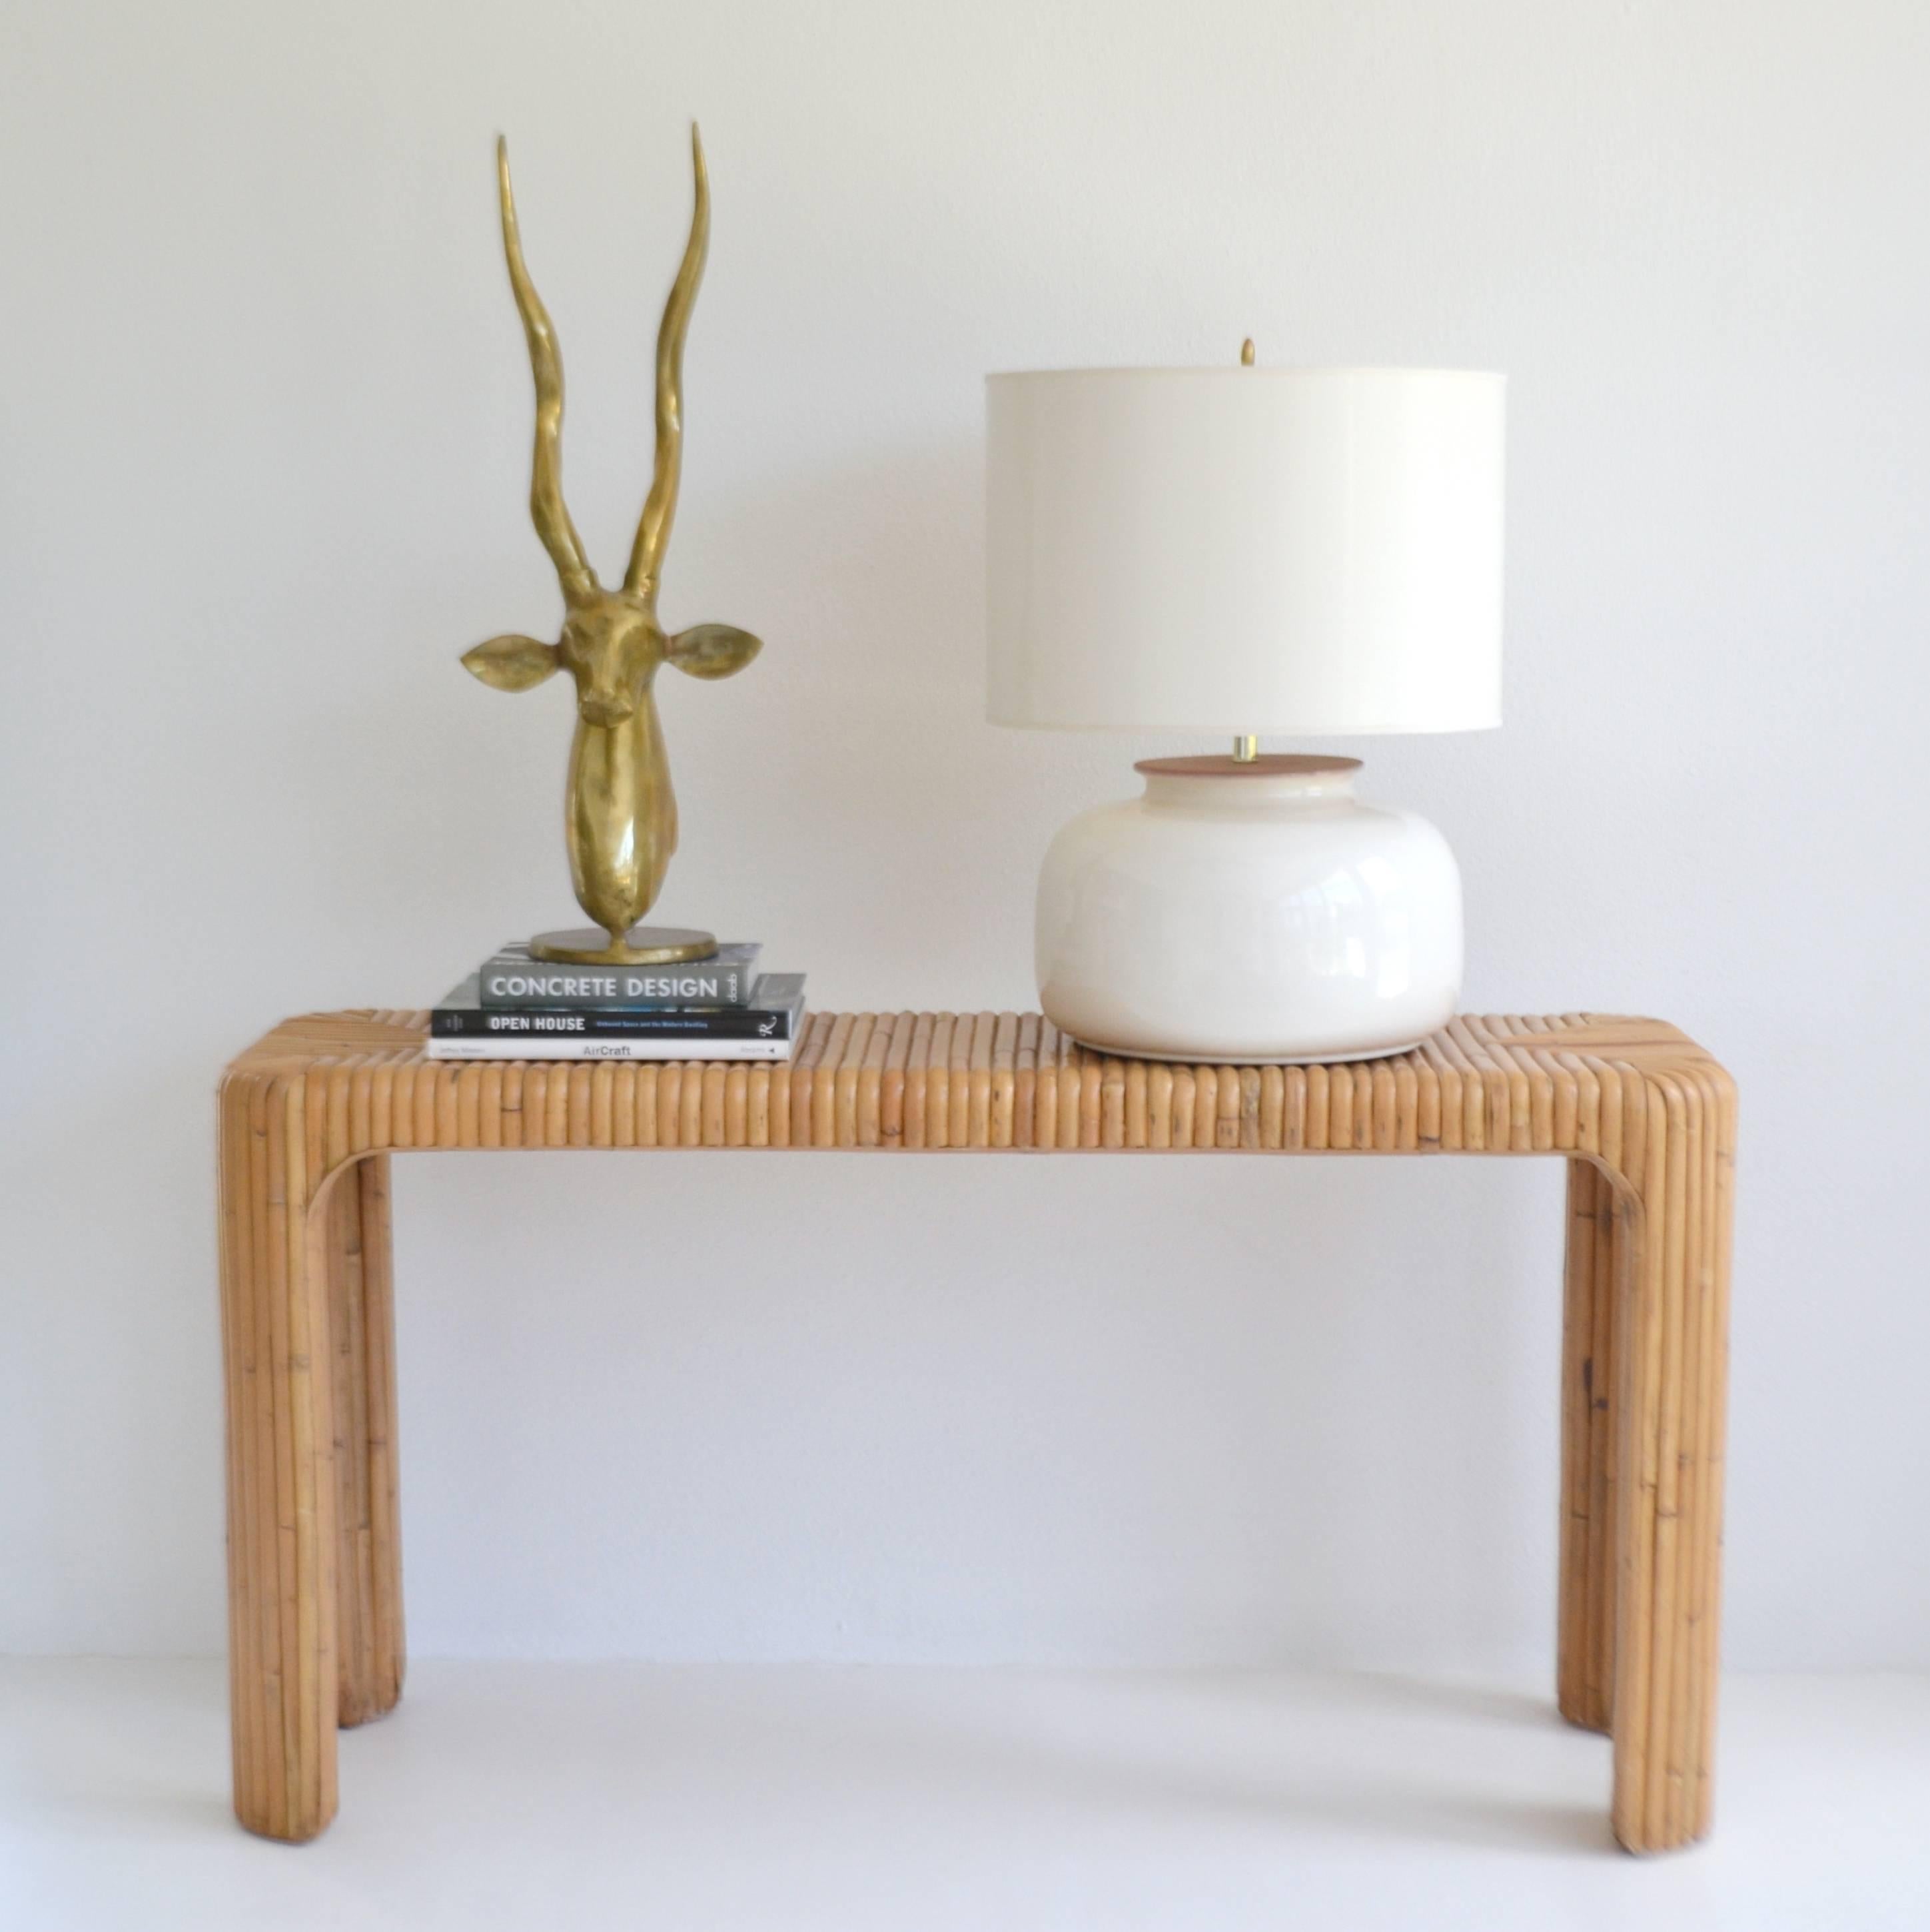 Sleek midcentury bent bamboo console table, circa 1960s-1970s. This striking decorative sofa table is artisan crafted and designed of split bamboo over a hardwood frame.